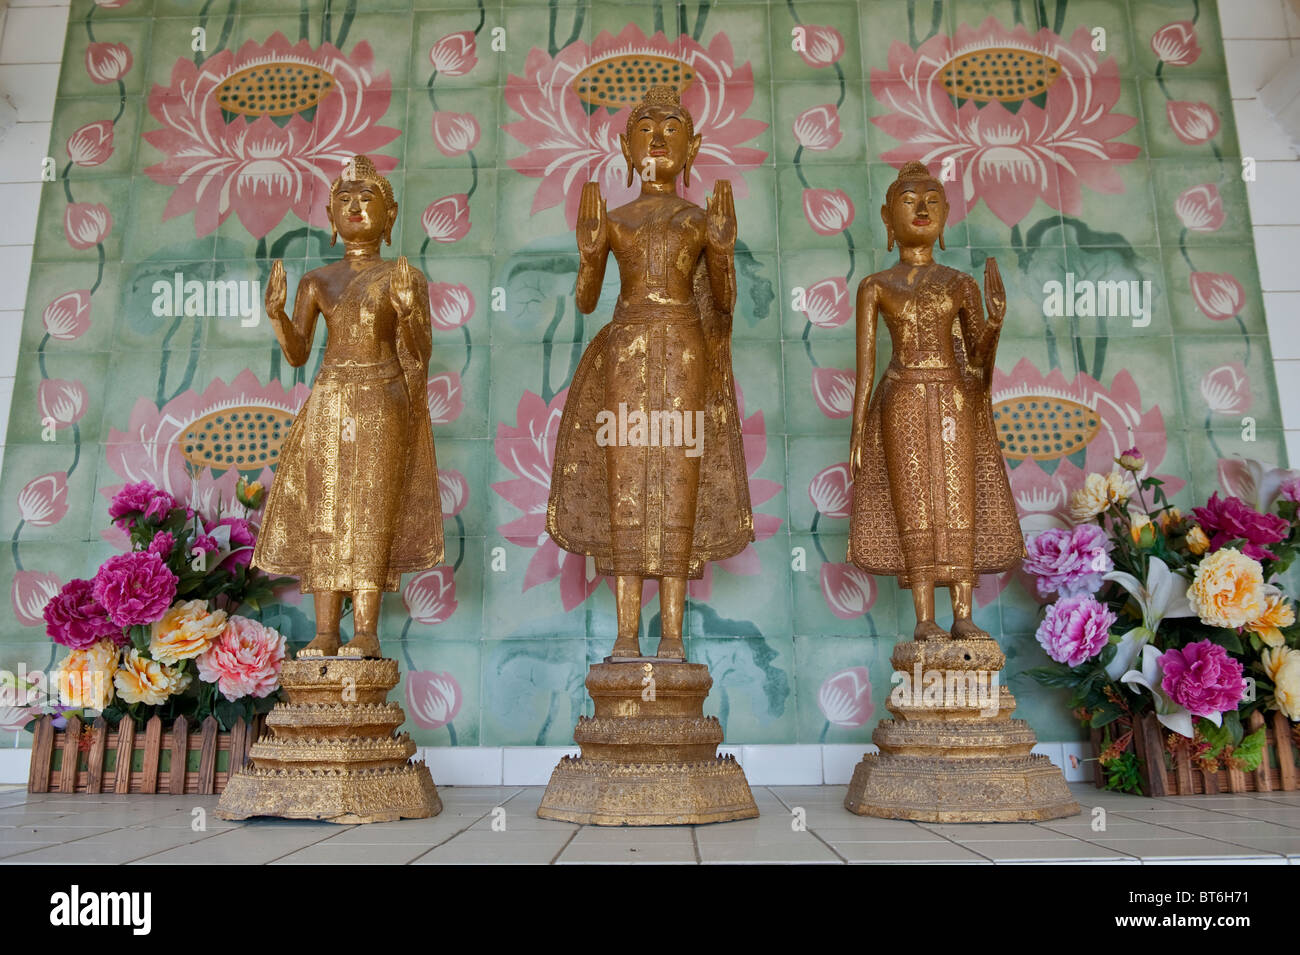 Altar in the Pagoda of 10,000 Buddhas. Kek Lok Si Temple in Penang, Malaysia Stock Photo